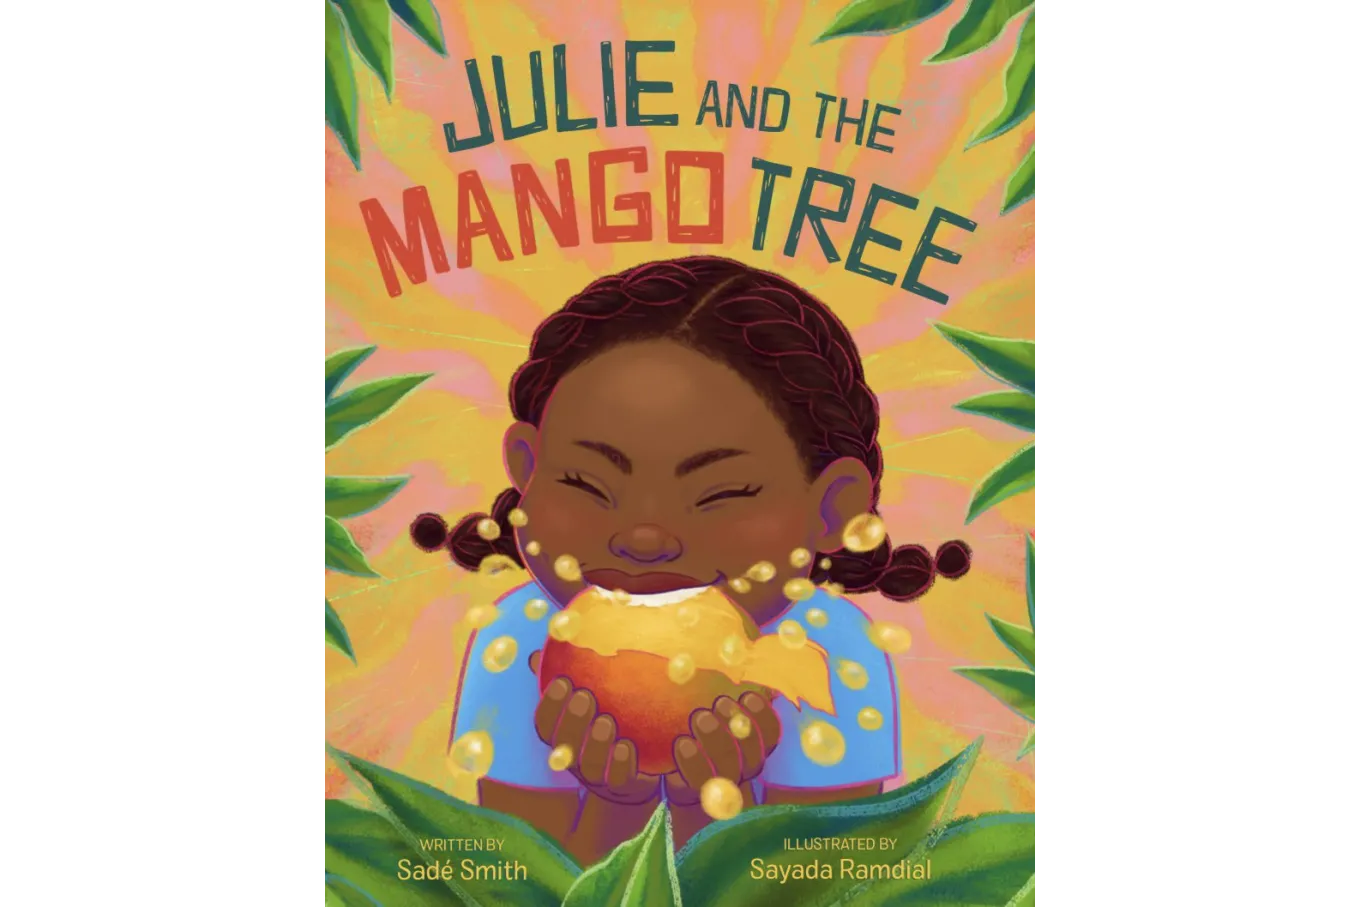 Cove of Julie and the Mango Tree